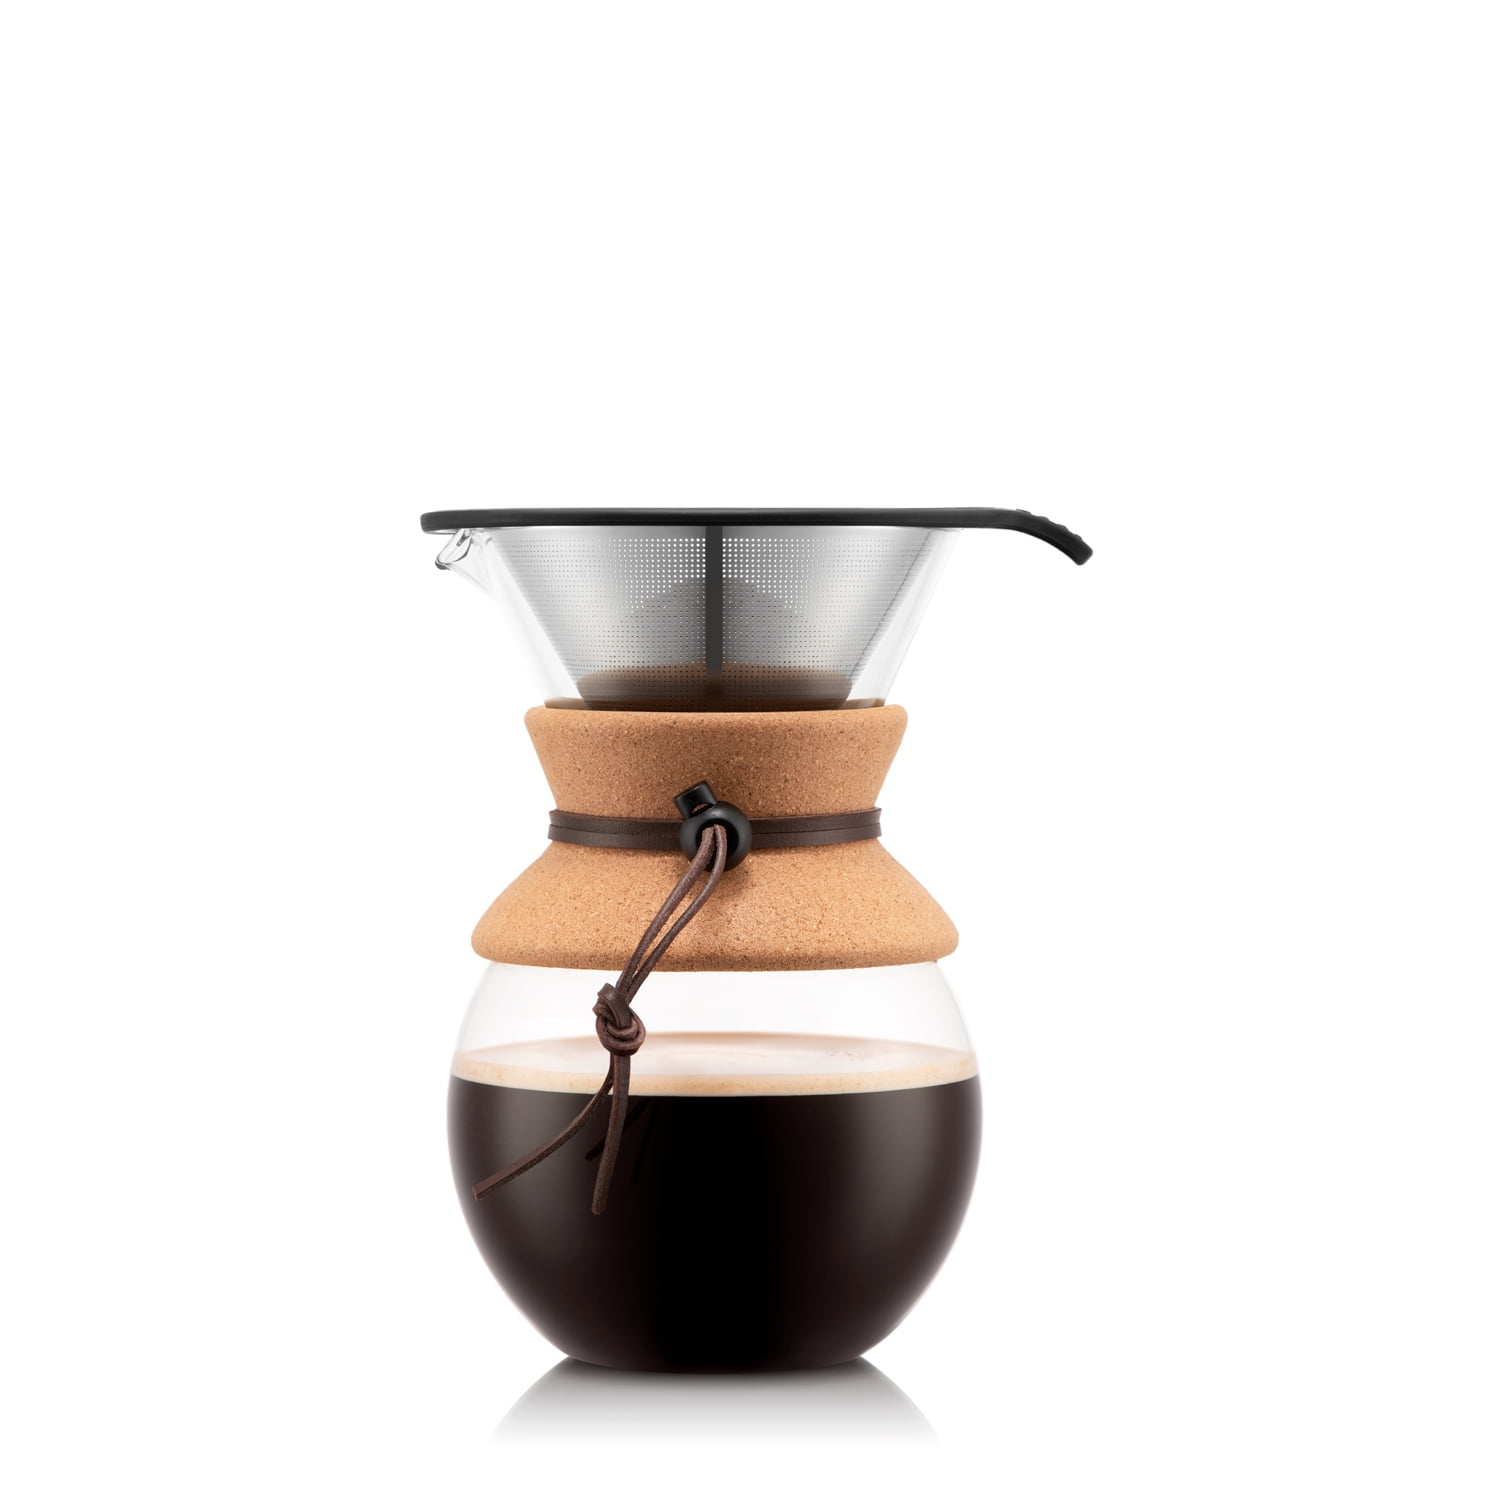 23 Home Coffee Bar Accessories, Gadgets, and Essentials (2020